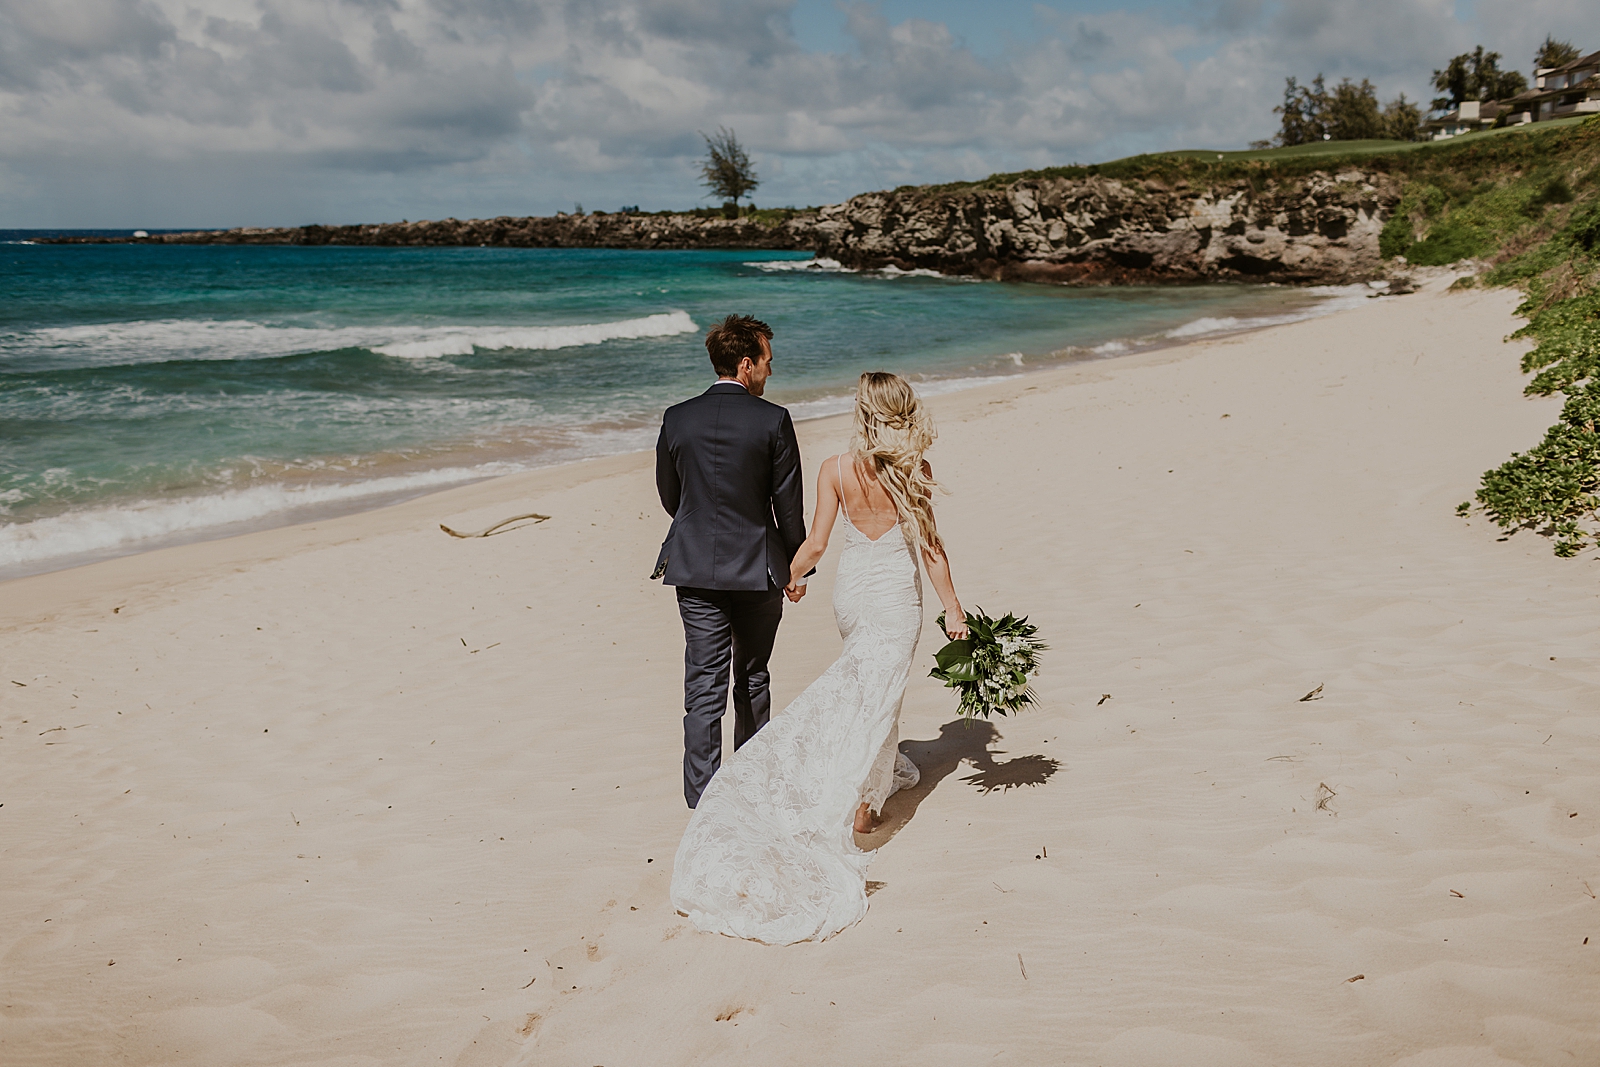 Bride and Groom holding hands walking on the beach with the ocean in sight